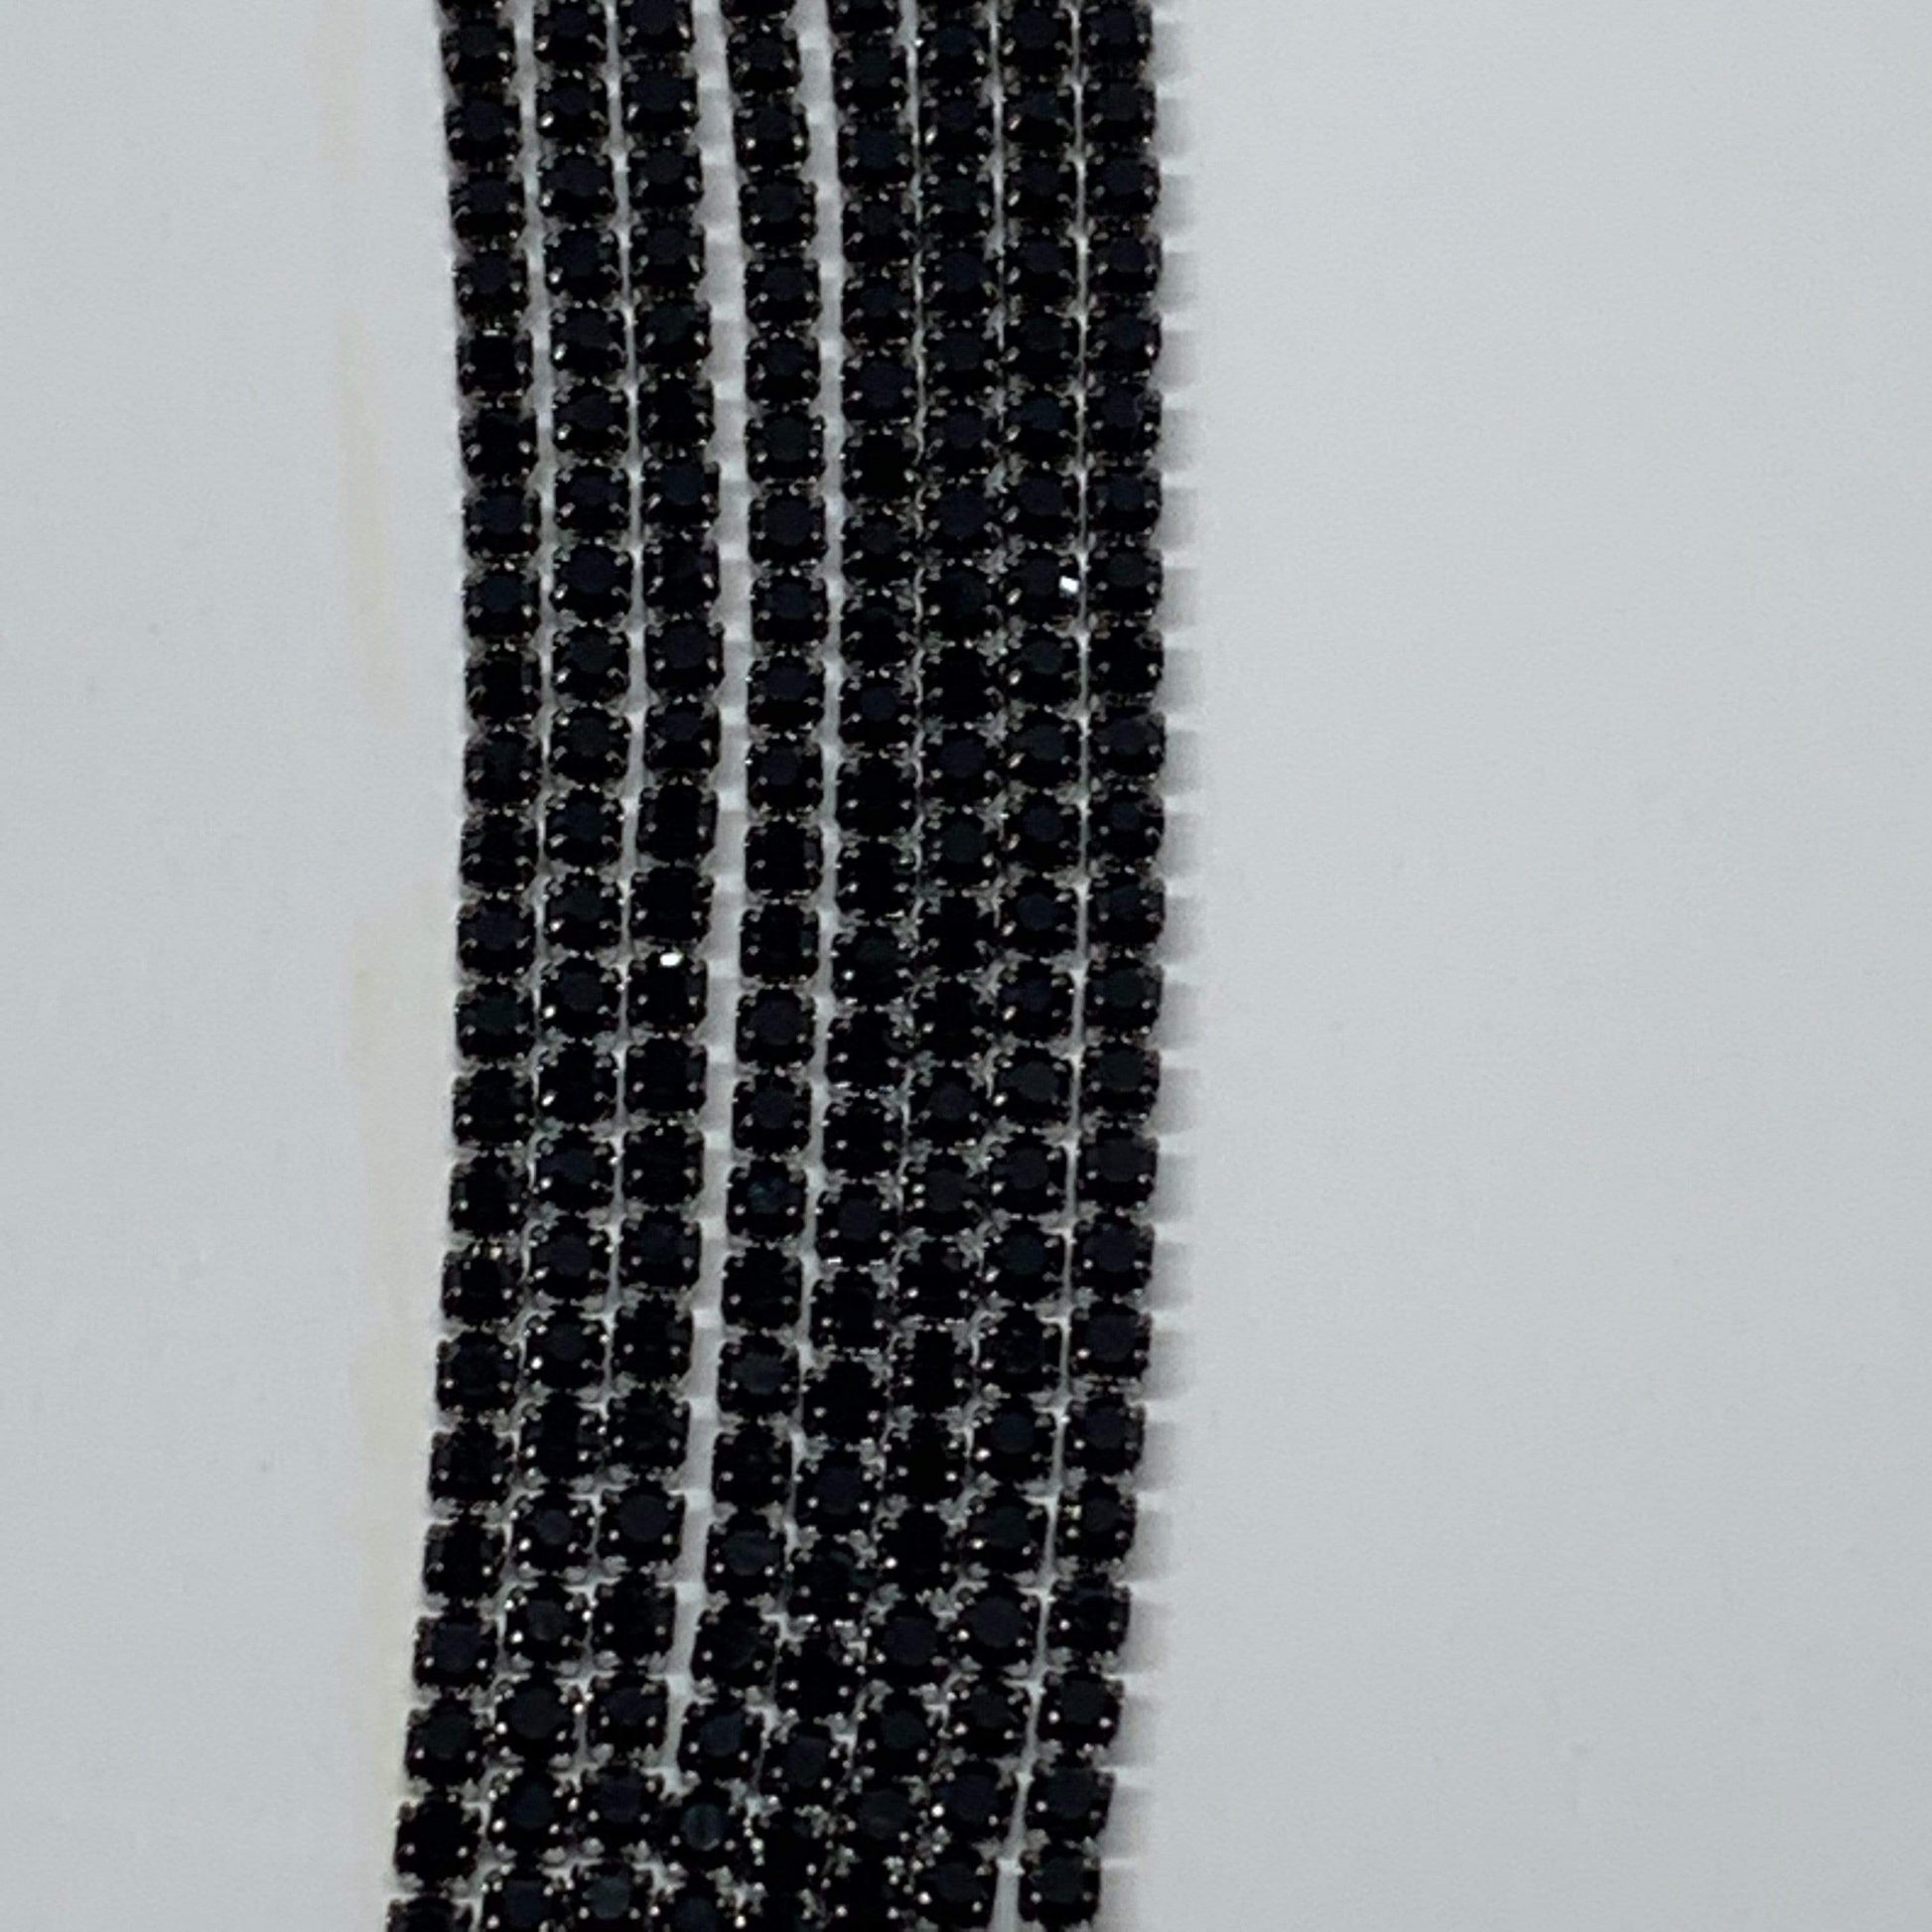 Sundaylace Creations & Bling SS4 Metal Rhinestone Chain Ss4 Black Stone, Gunmetal Metal Rhinestone Chain, Dense Chain, 33" inches